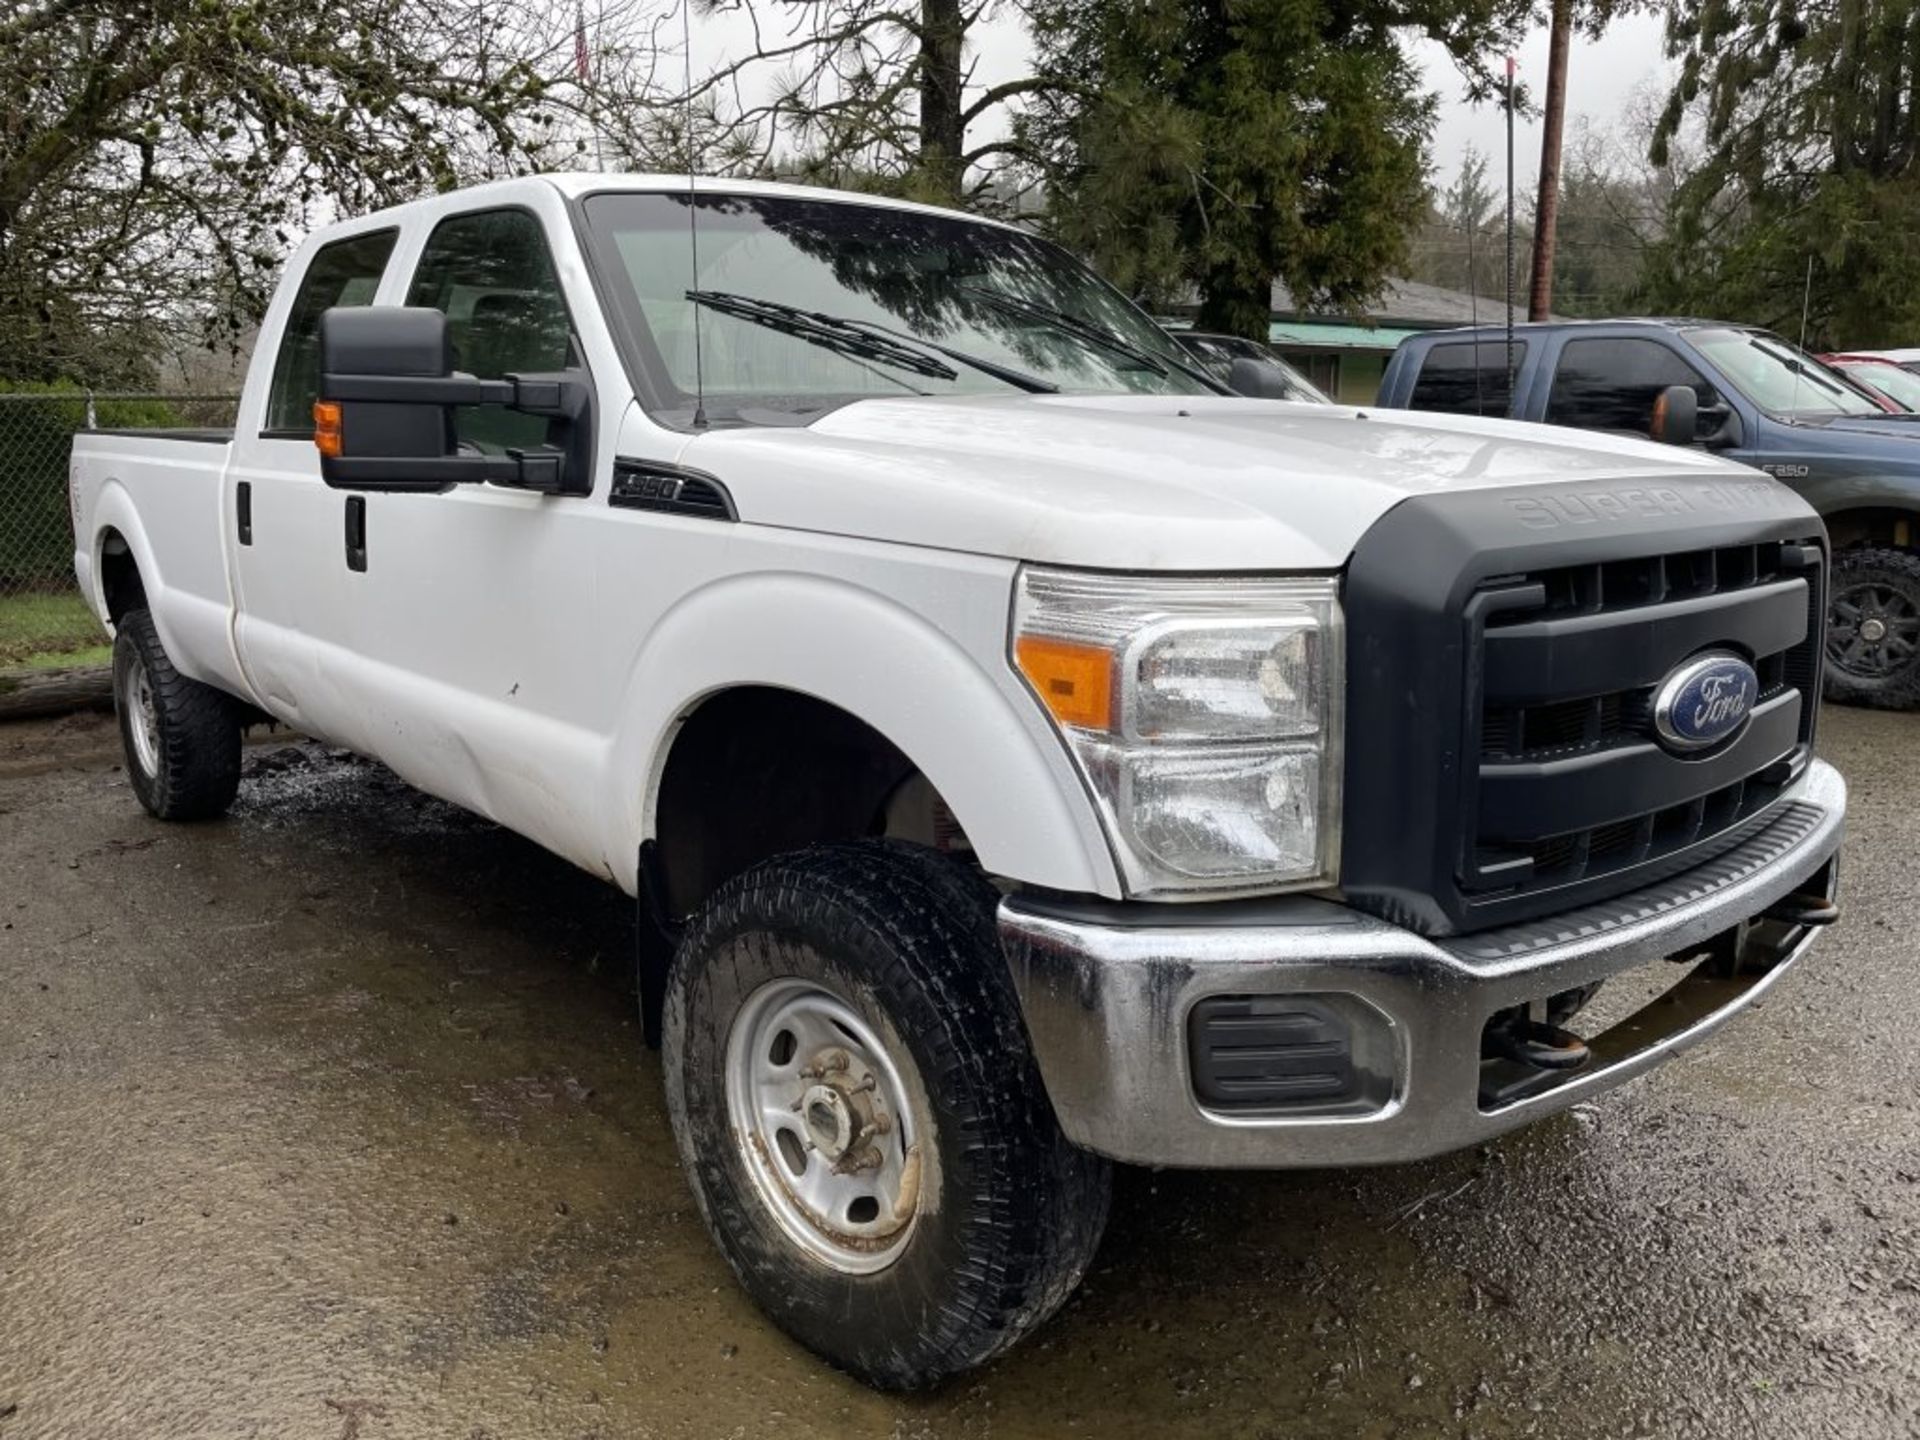 2014 Ford F350 SD 4x4 Crew Cab Pickup - Image 2 of 15